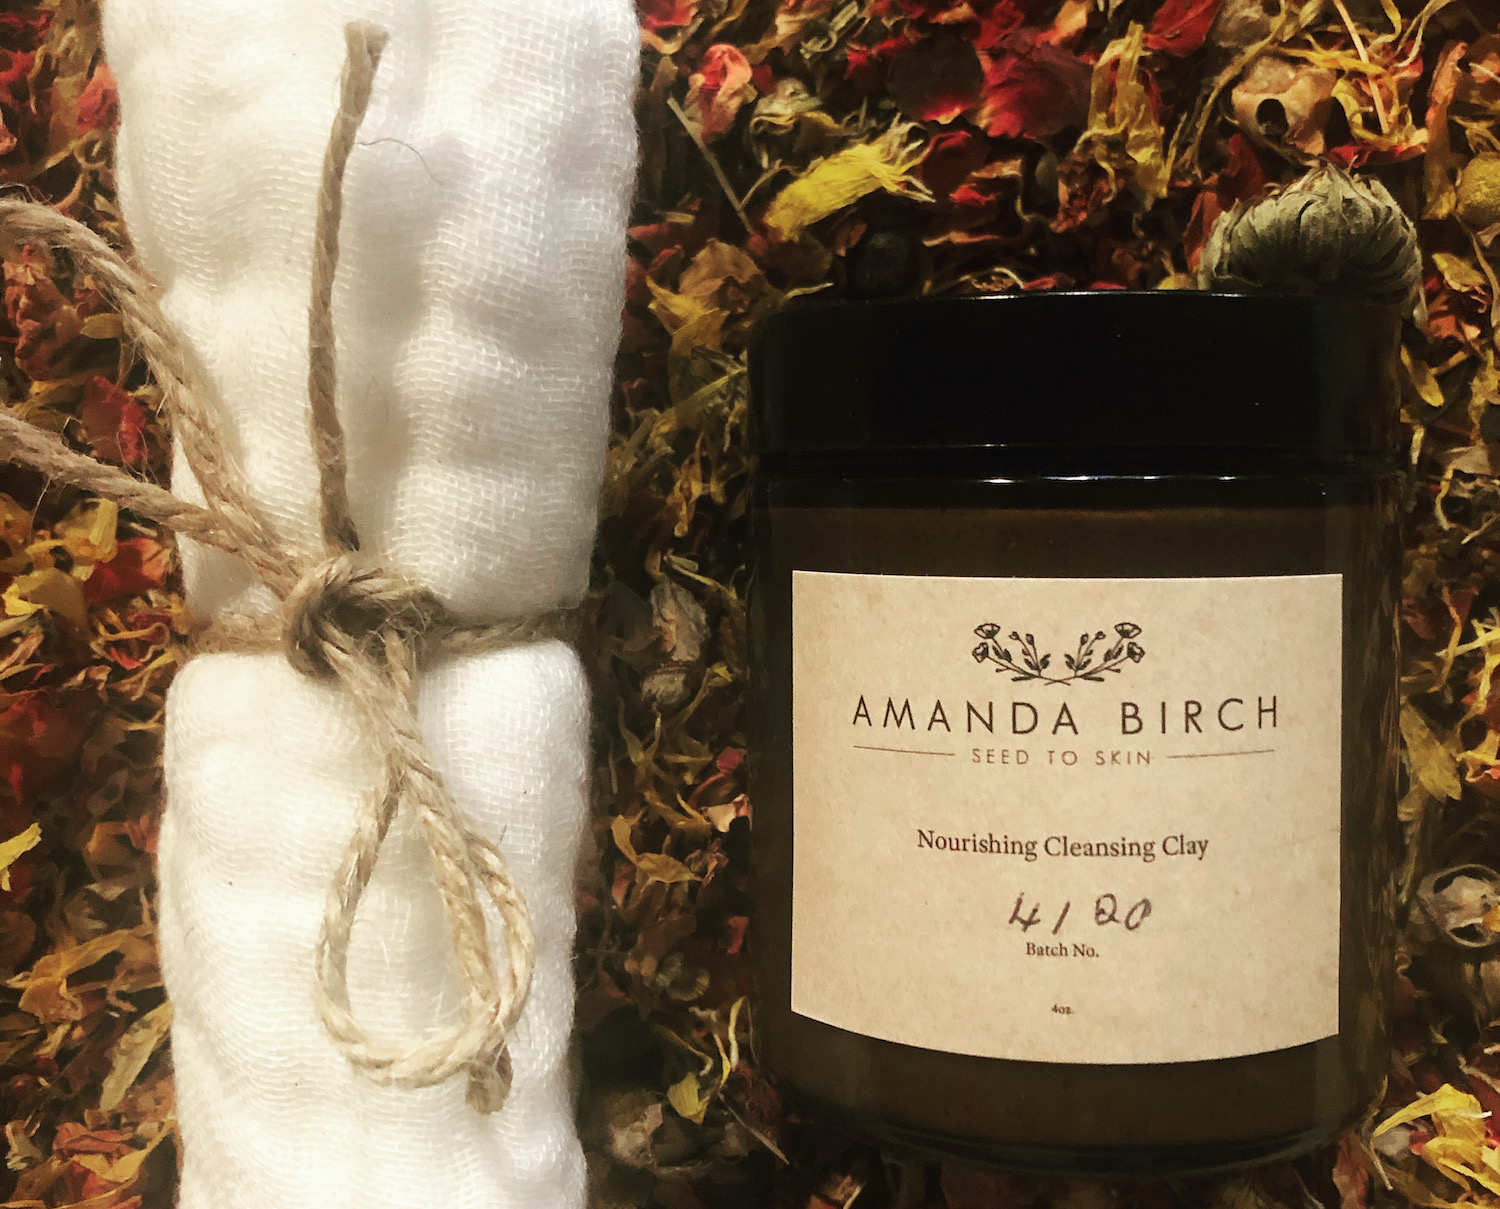 Amanda Birch has had a passion for holistic skincare for as long as she can remember, and has been a facialist for over 25 years.